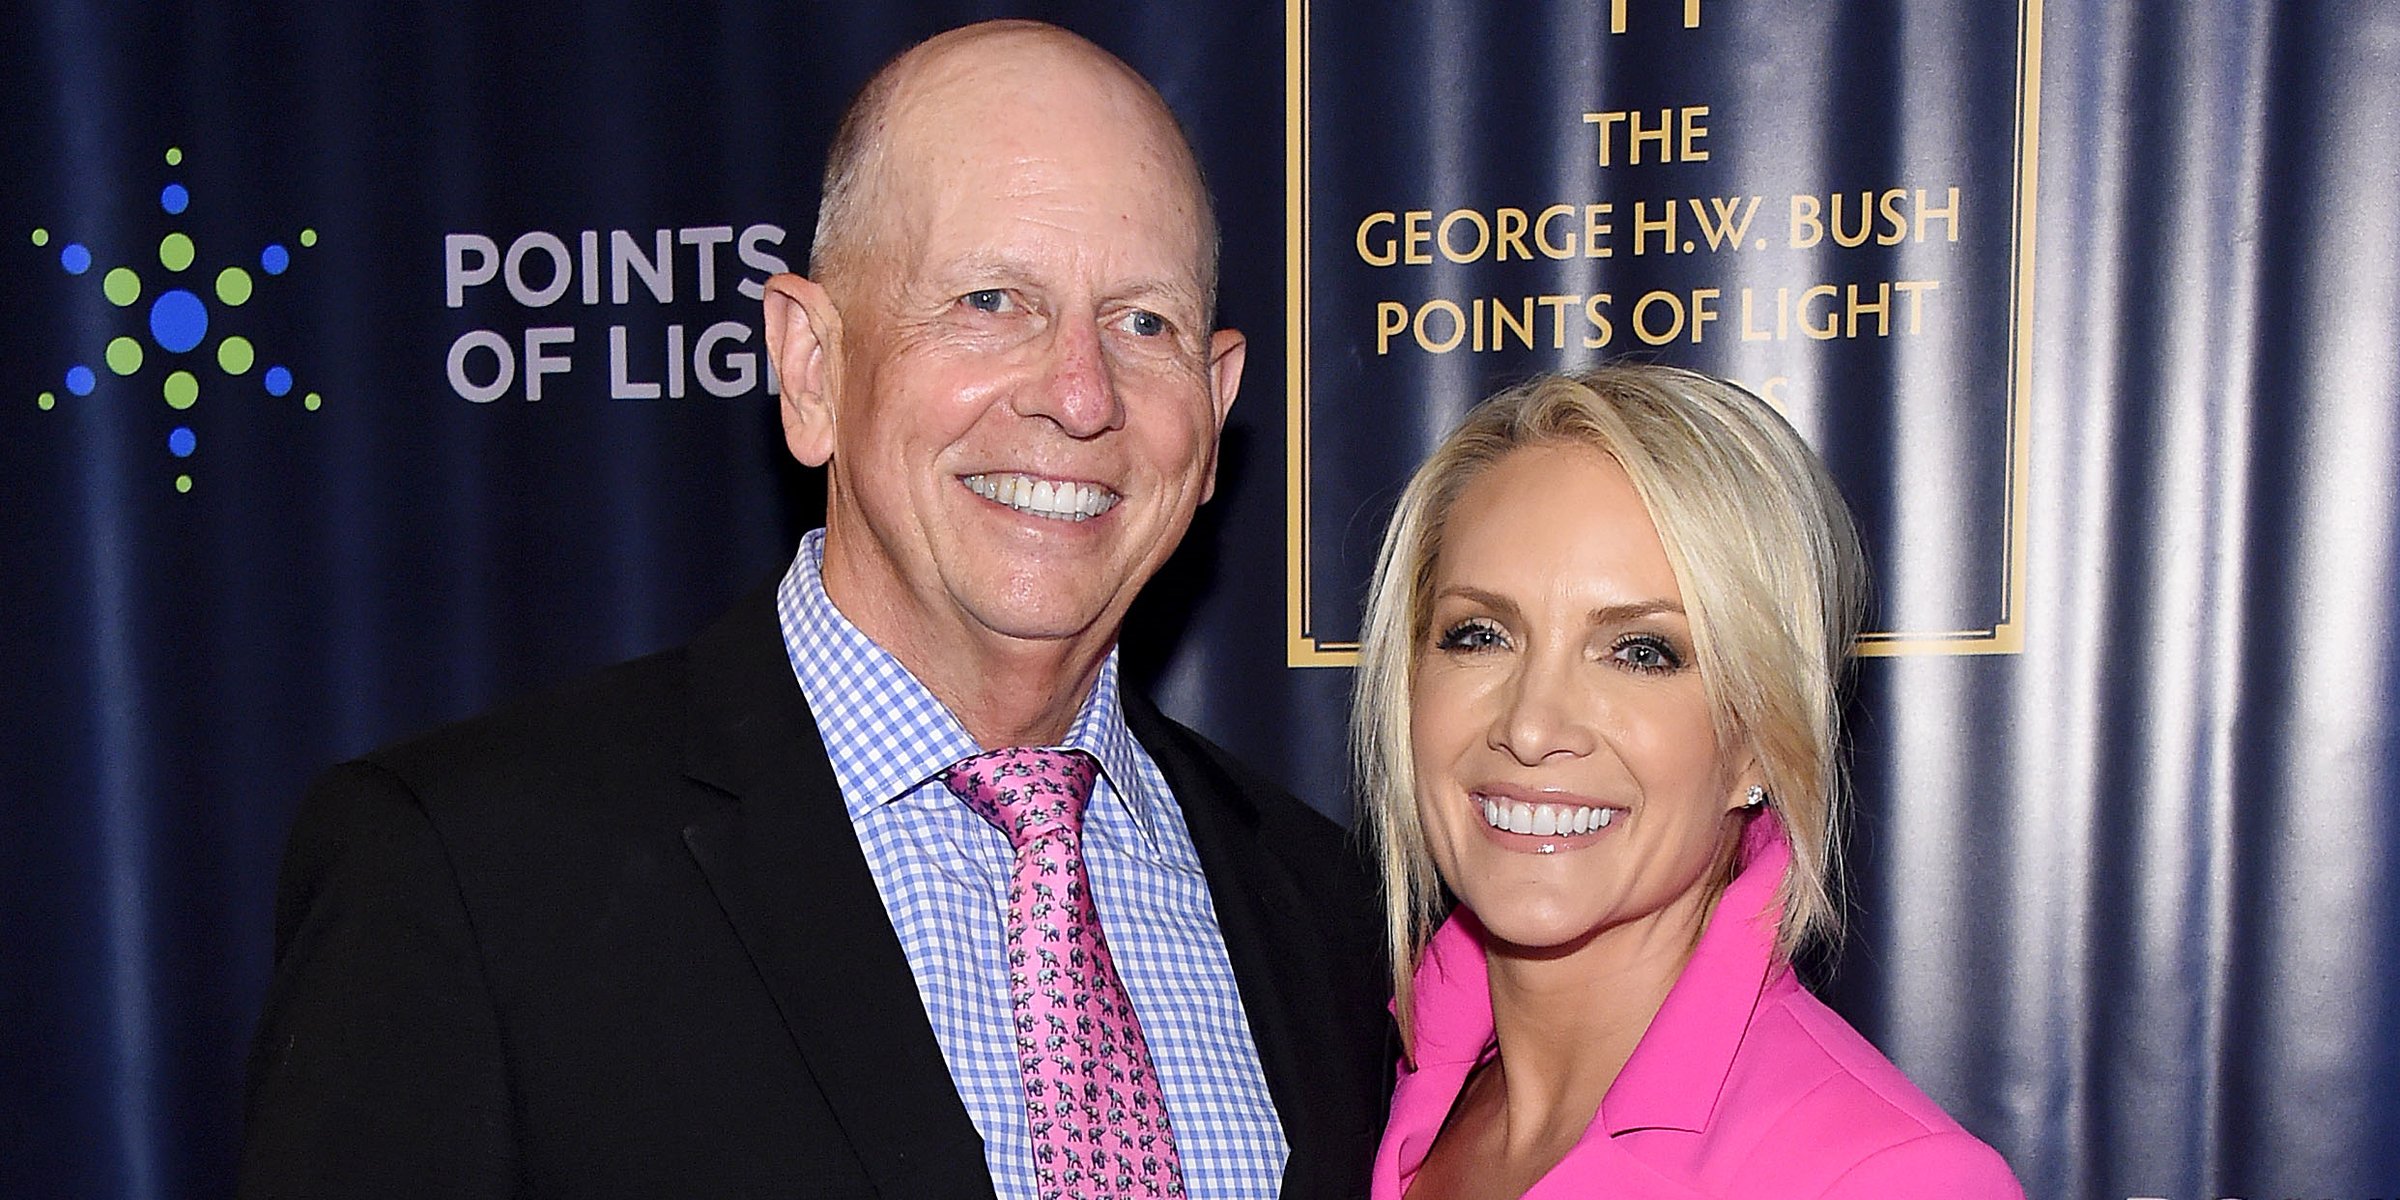 Peter McMahon and Dana Perino | Source: Getty Images